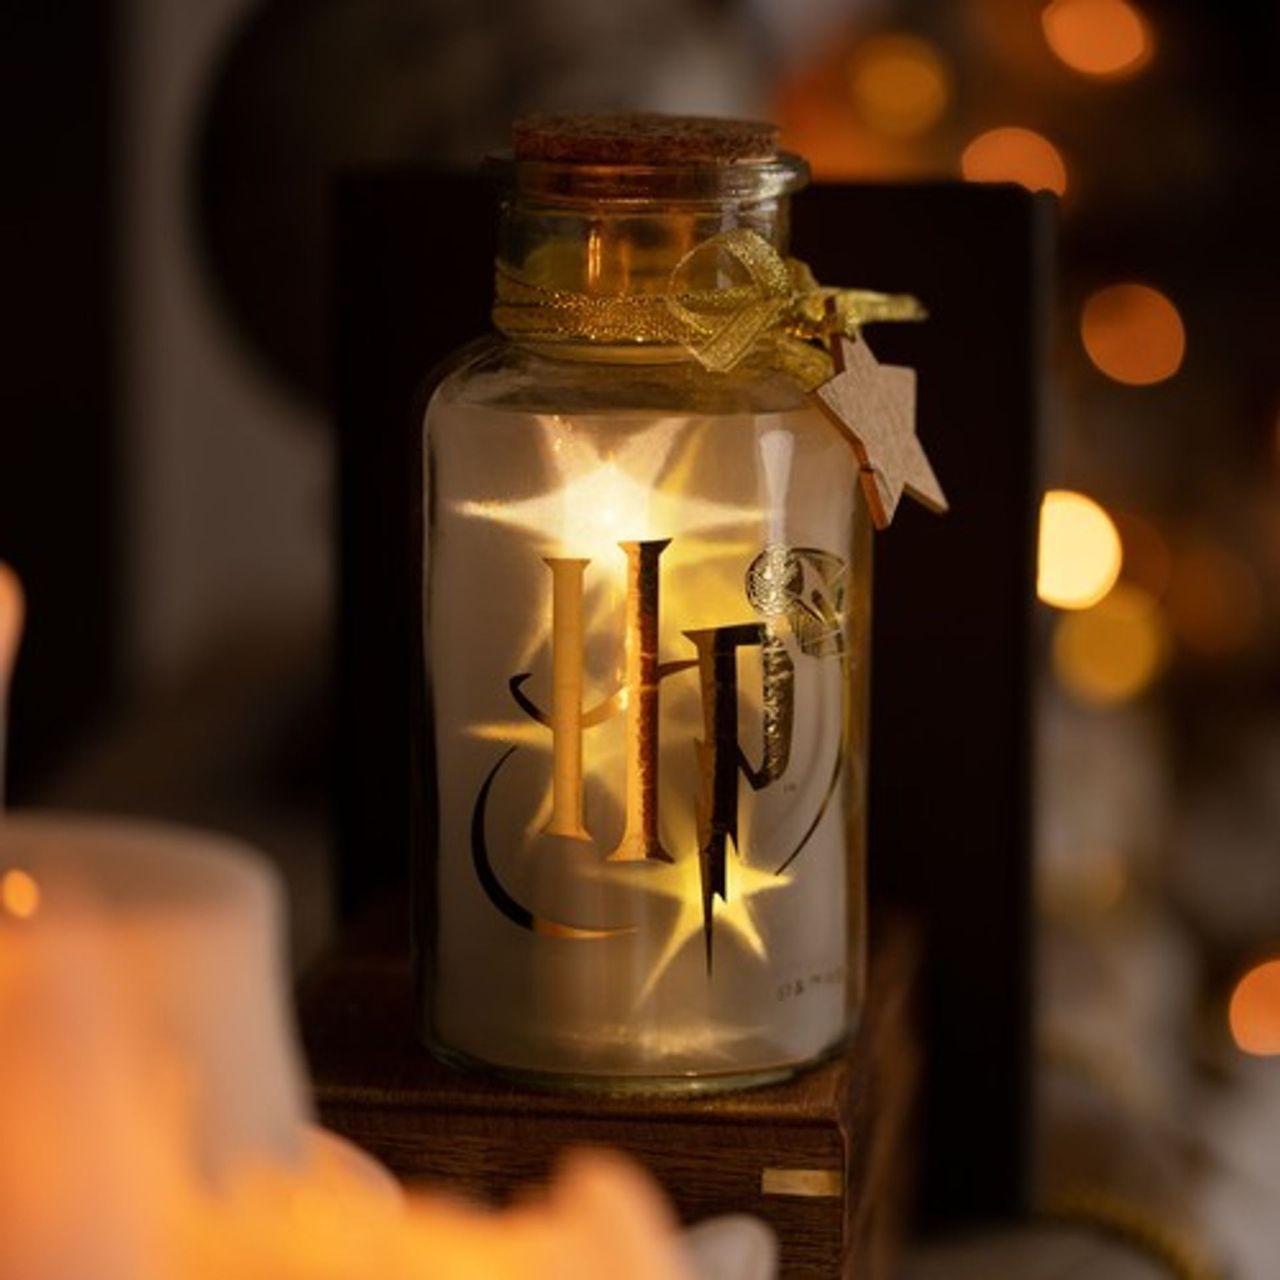 Harry Potter LED Light Up Glass Jar - Hogwarts Crest  Lumos maxima! Light up your home this Christmas with this Hogwarts LED glass jar light. With a stunning print, this fun accessory is sure to add a touch of magic to your home this Christmas.